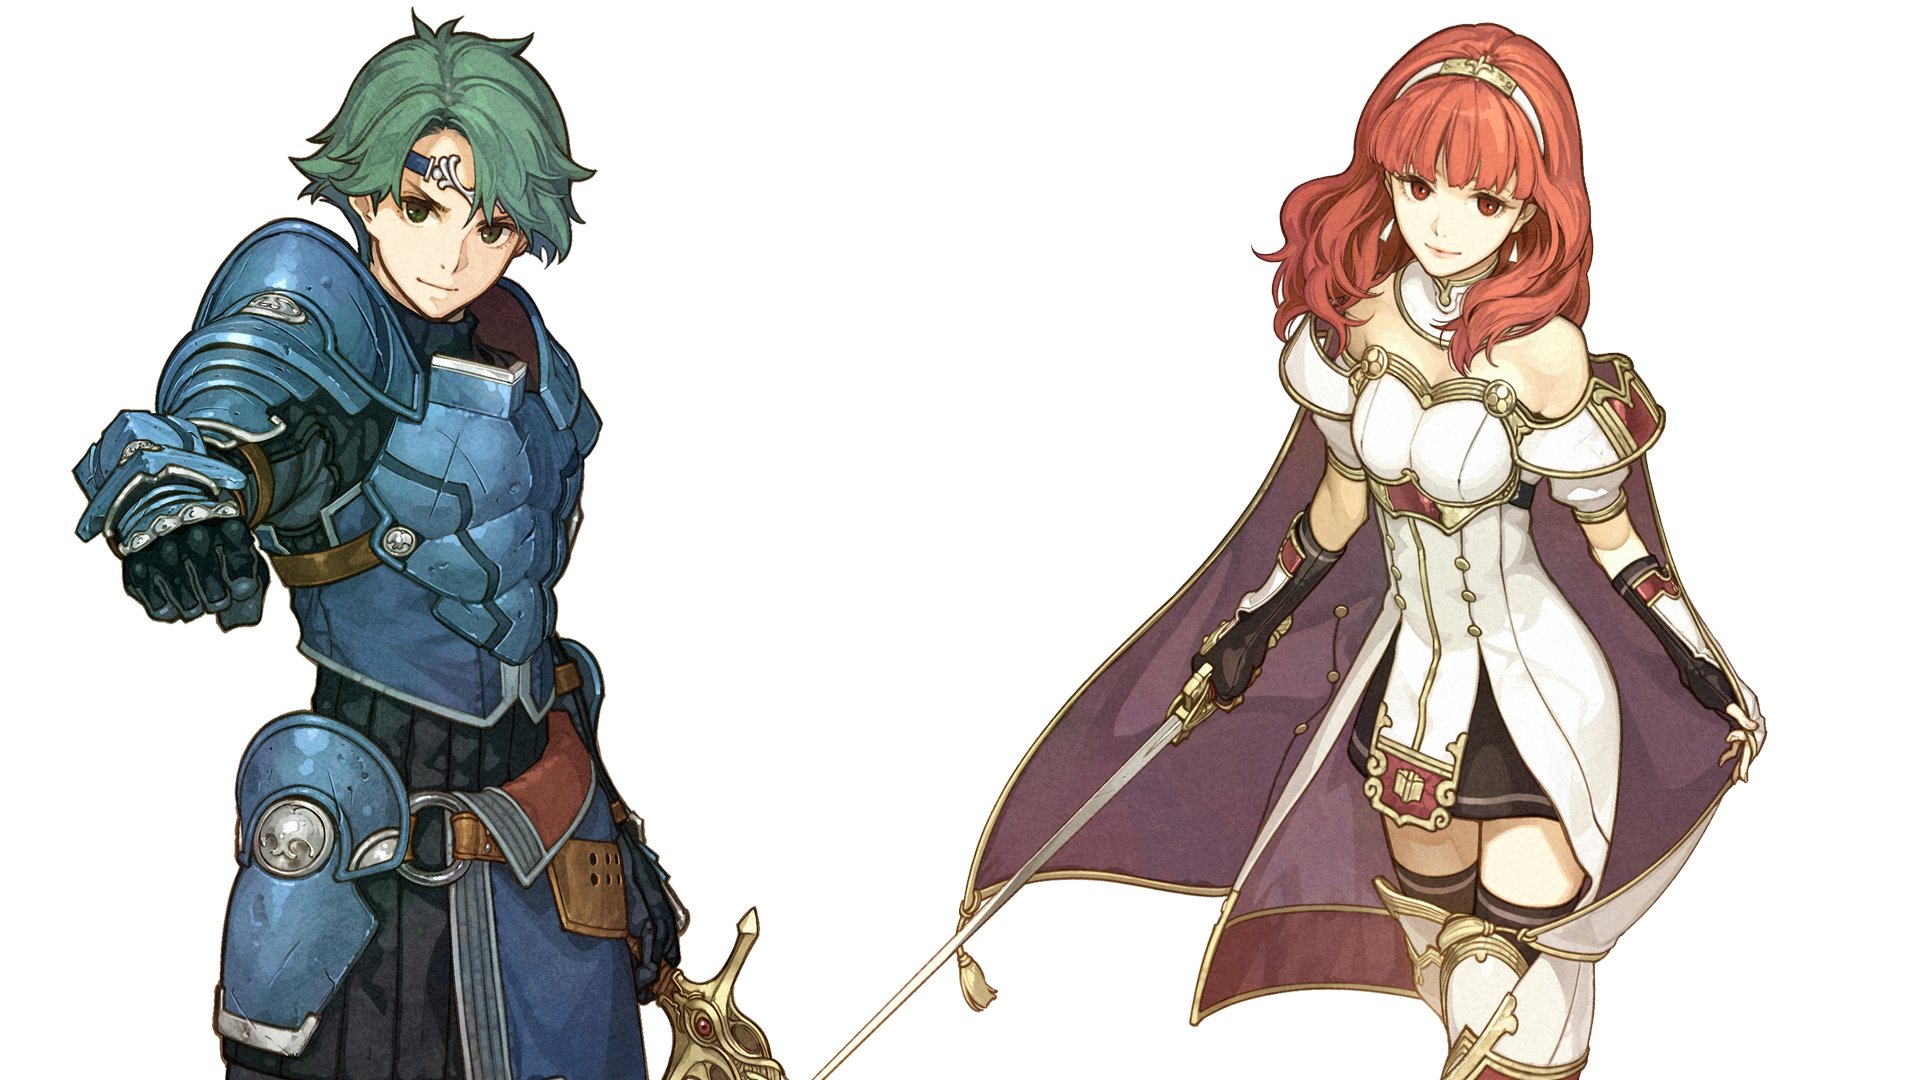 Fire Emblem Echoes Shadows Of Valentia HD Wallpaper Background Image.